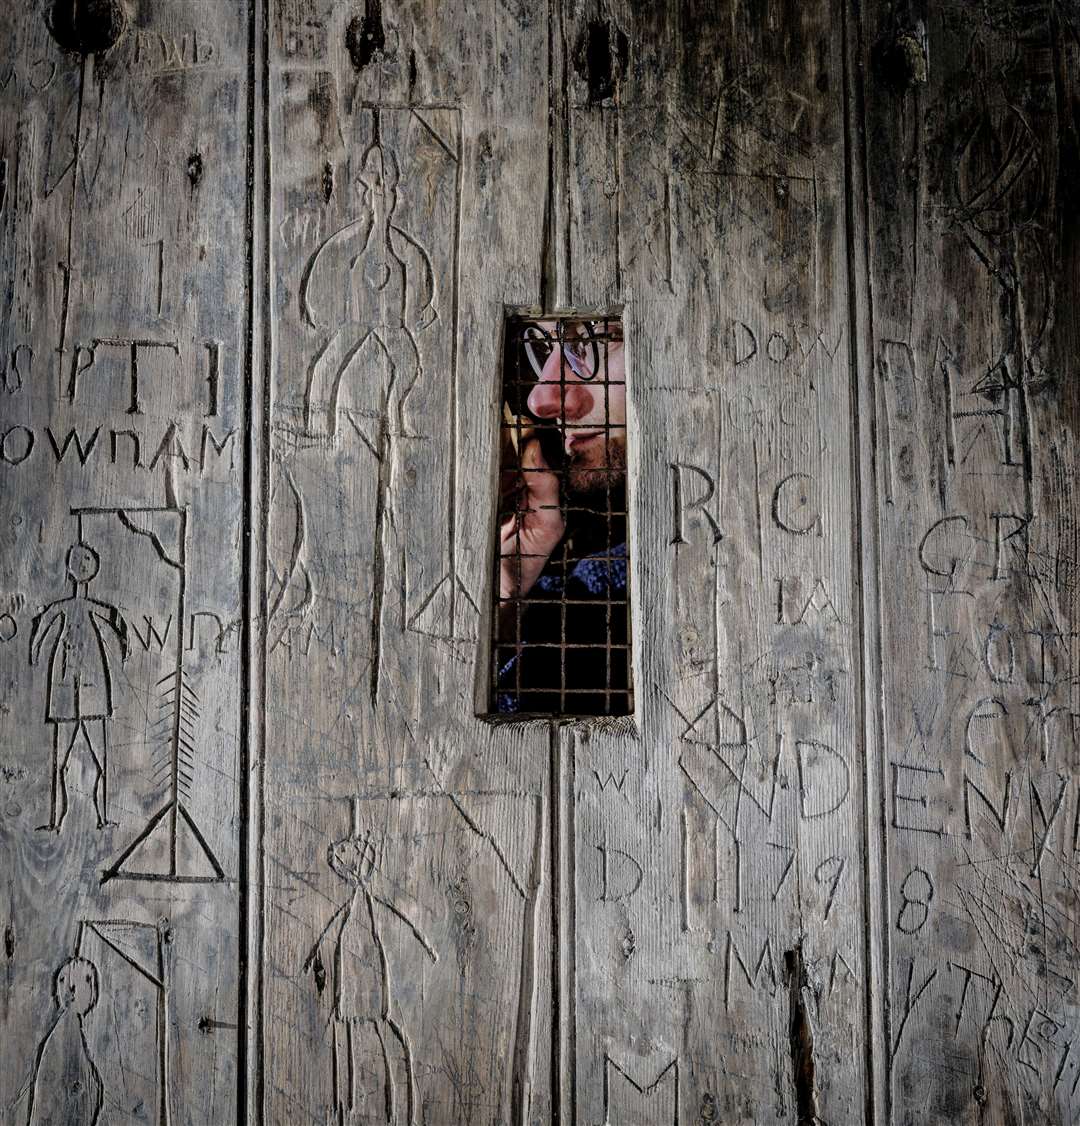 A sailing ship, the date of the French revolution (1789), nine macabre depictions of hangings, and countless initials feature on the door. Picture: English Heritage